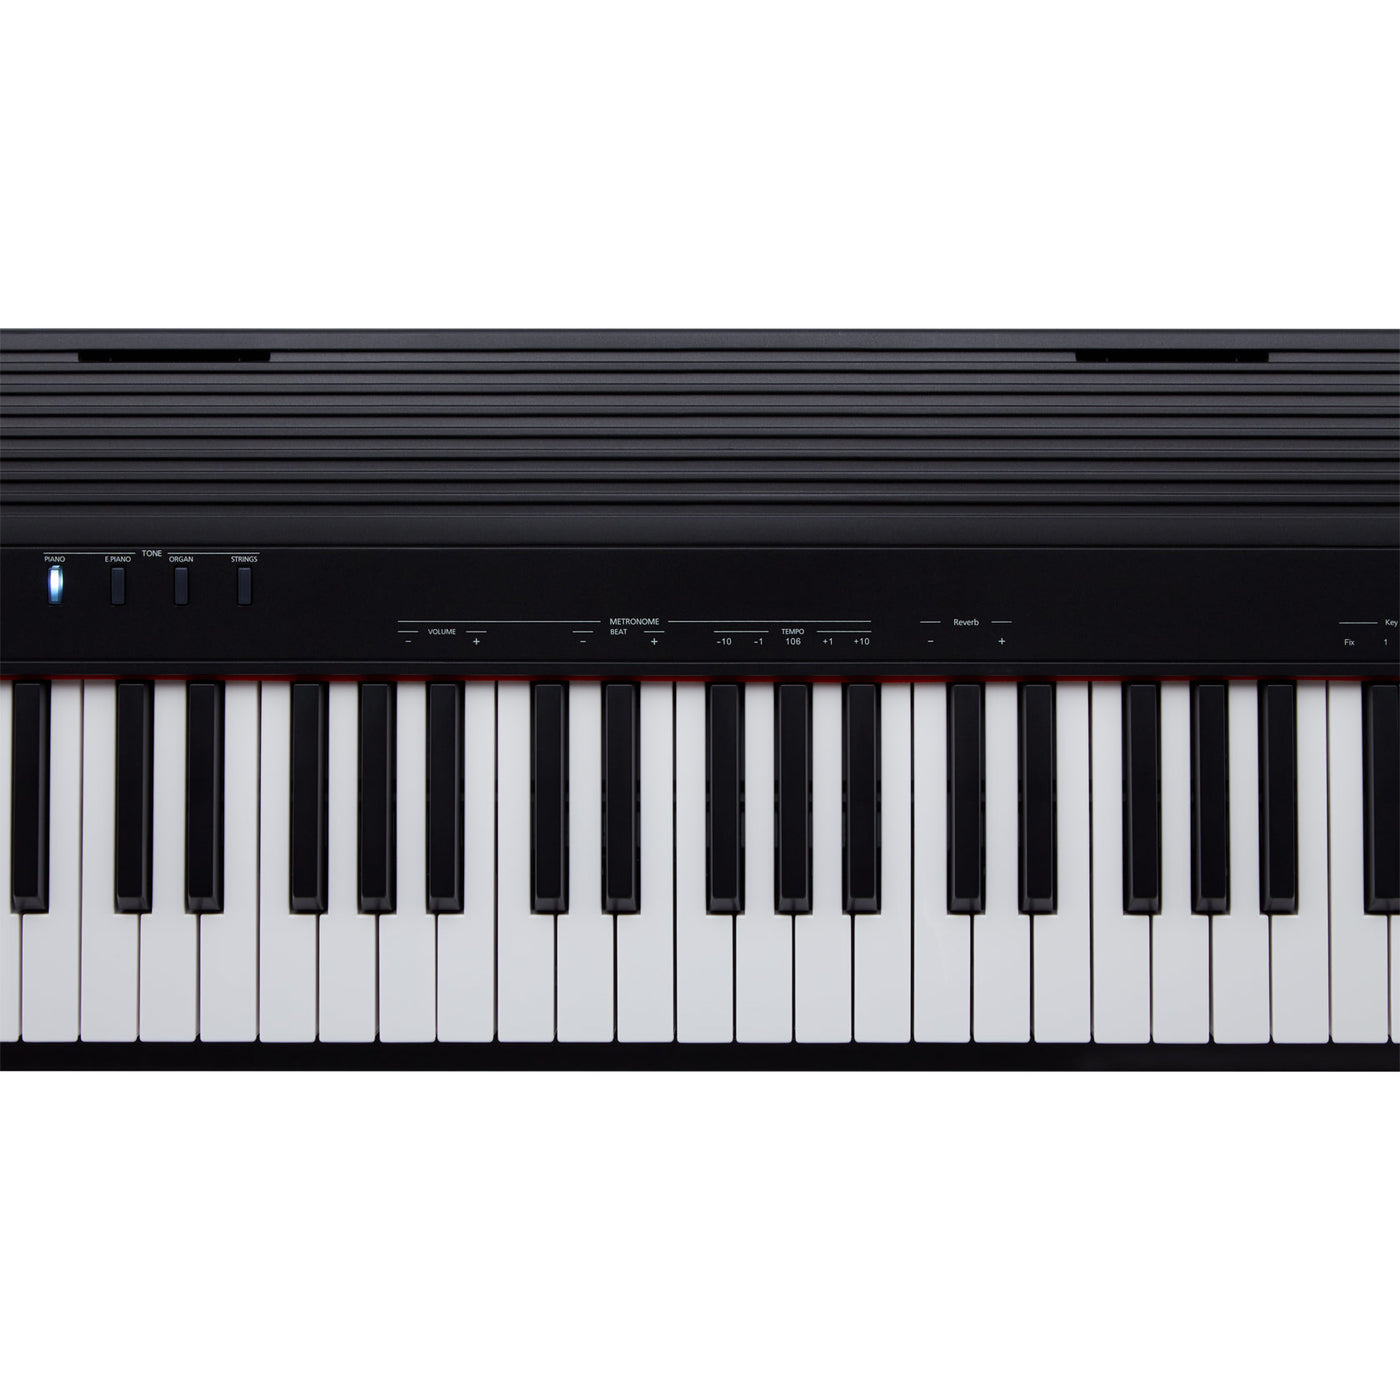 Roland has a new 88-key keyboard, and it means MIDI 2.0 has